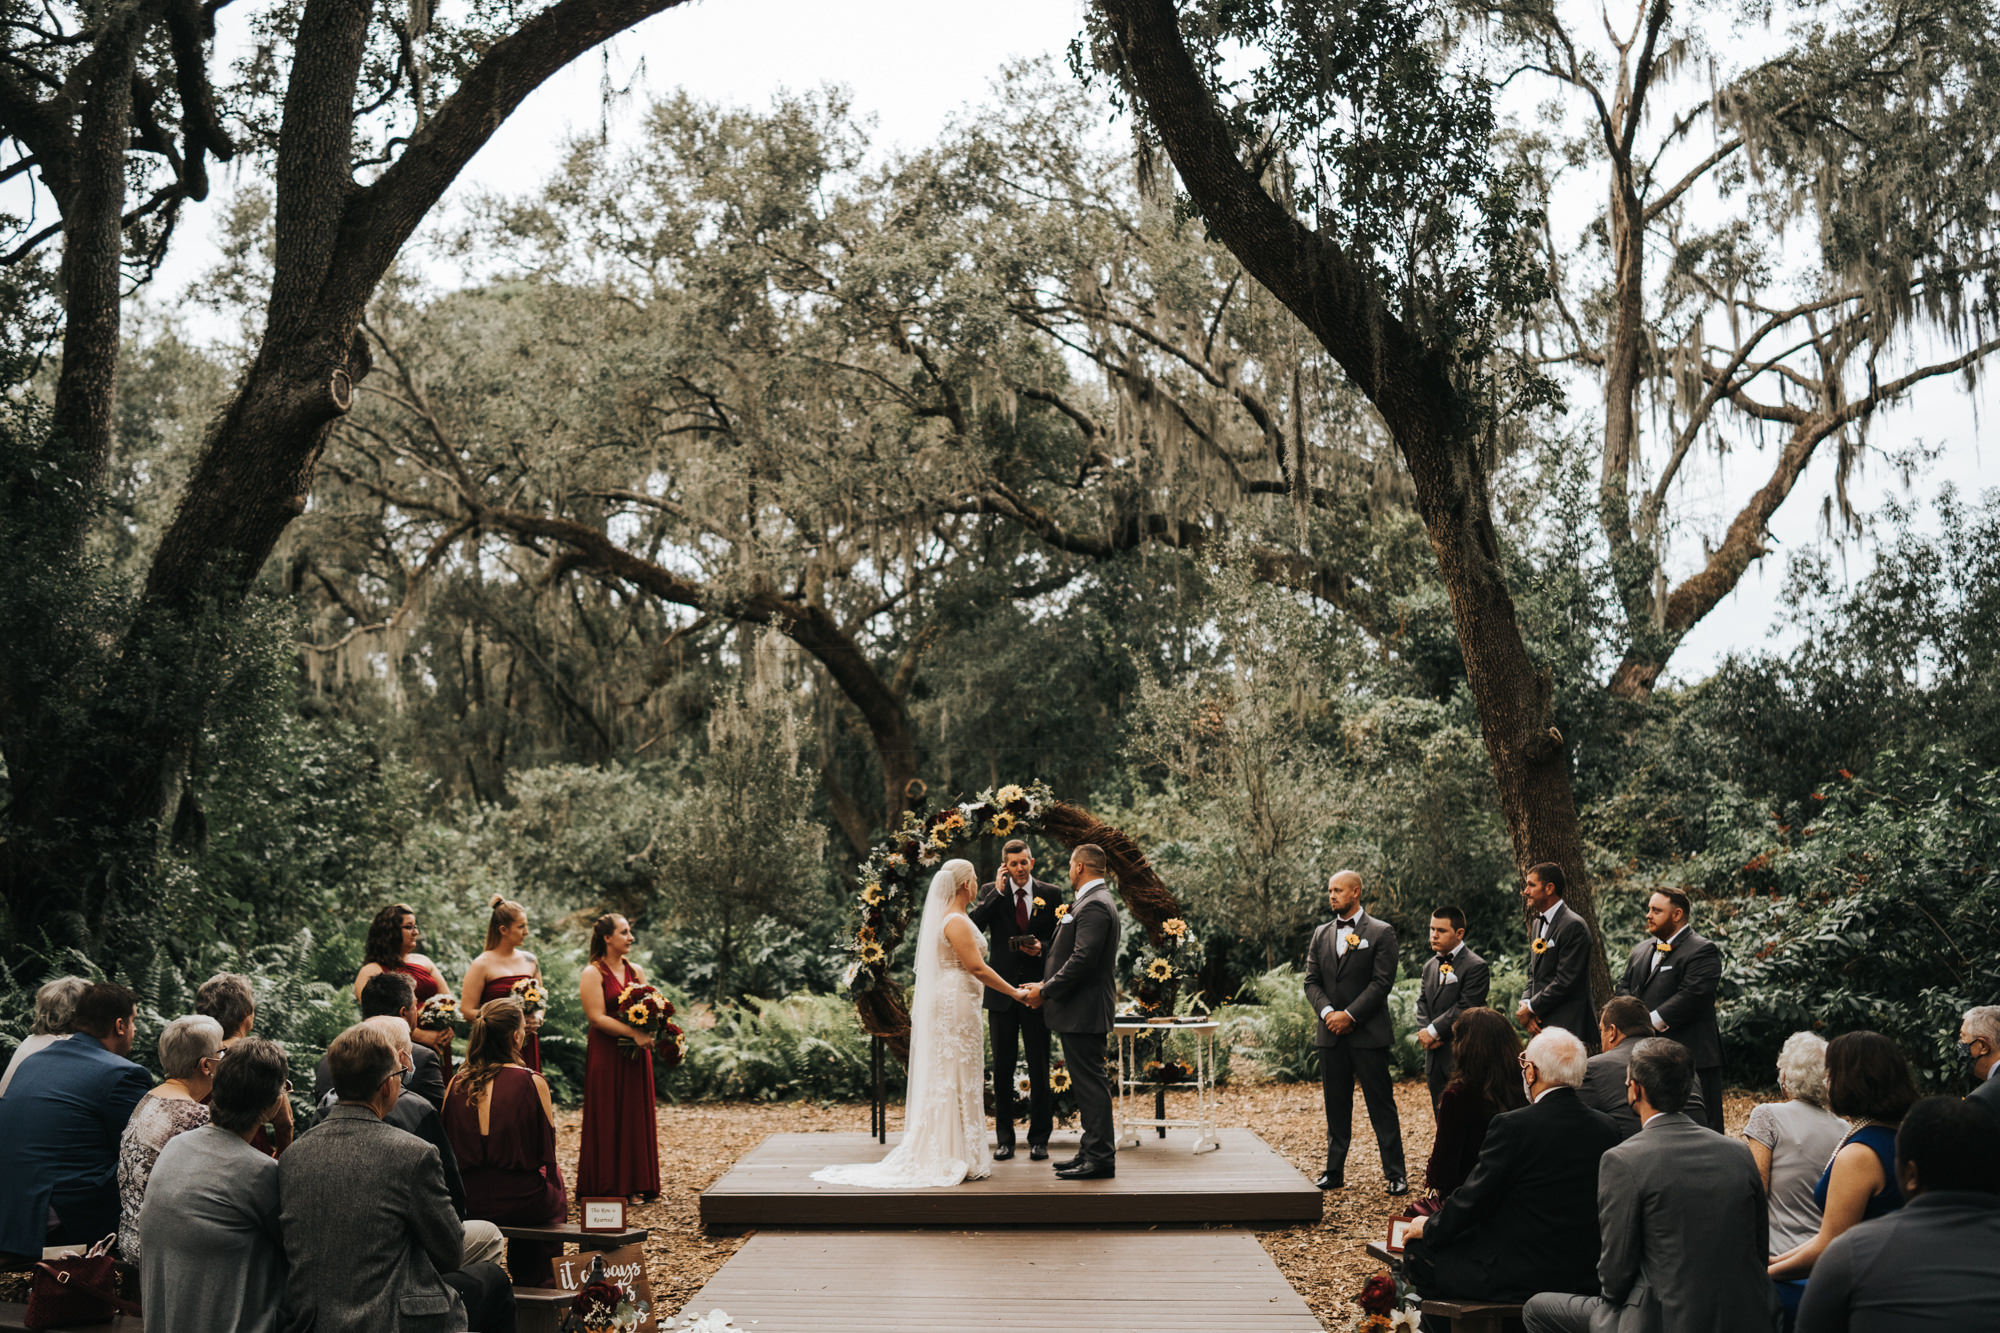 Rustic Dover Burgundy and Yellow Sunflower Outdoor Wedding Ceremony with Wood Benches and Round Grapevine Branch Arch | Long Chiffon Burgundy Bridesmaid Dresses | Groom and Groomsmen in Classic Charcoal Grey Gray Suit Tux with Sunflower Boutonniere